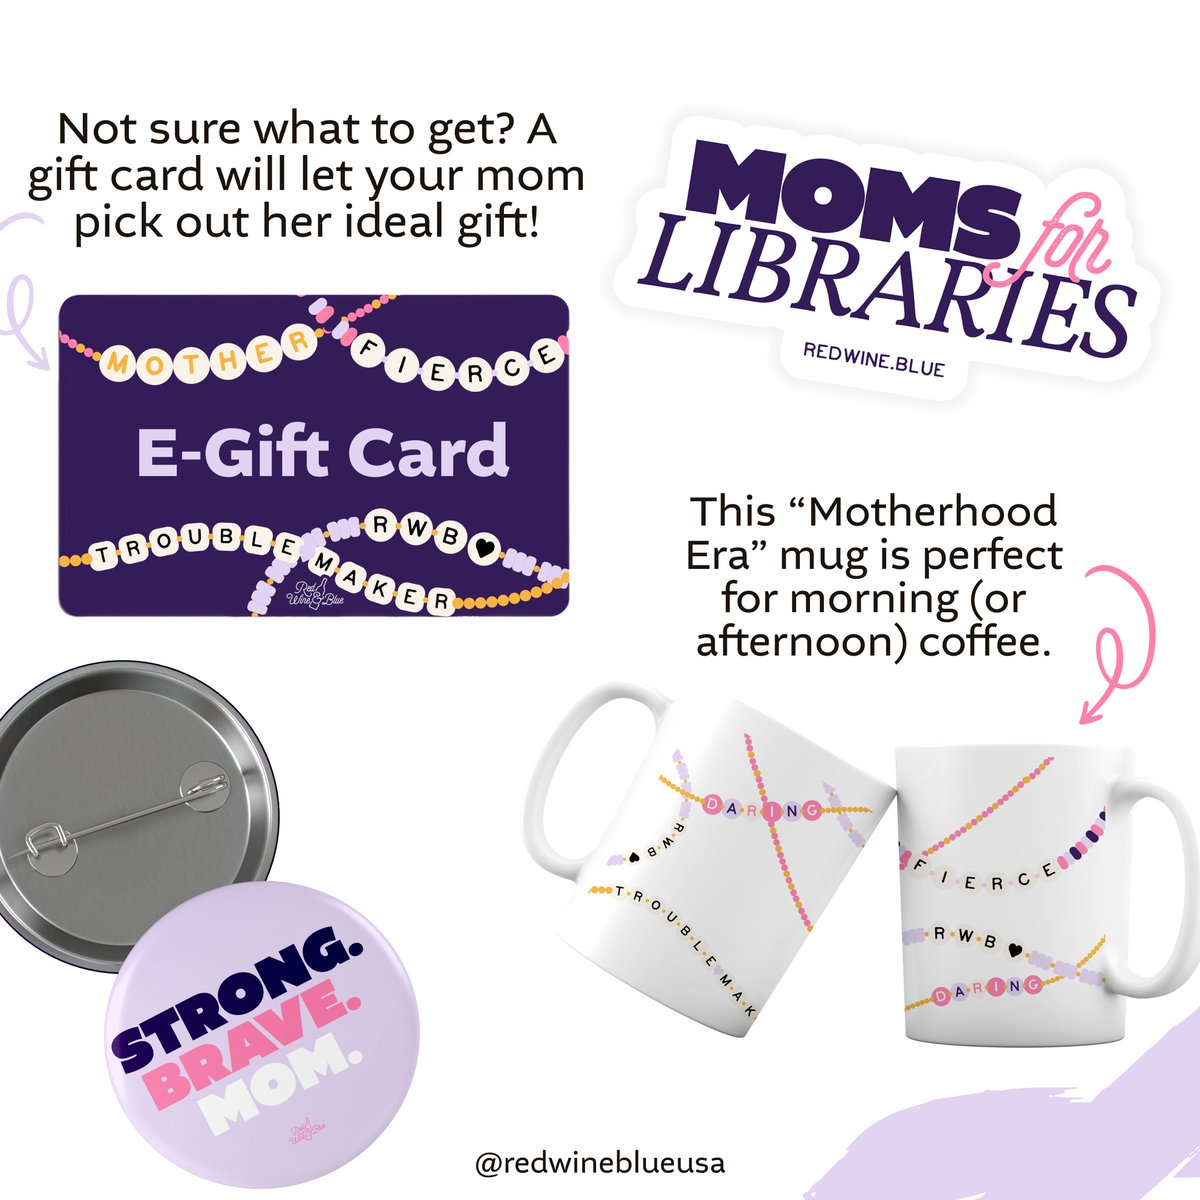 Still looking for the perfect gift for the mom in your life? We just dropped our Month of Moms gift shop with tons of new merch! Check it out and spoil a mom that you know! go.redwine.blue/MOM_x